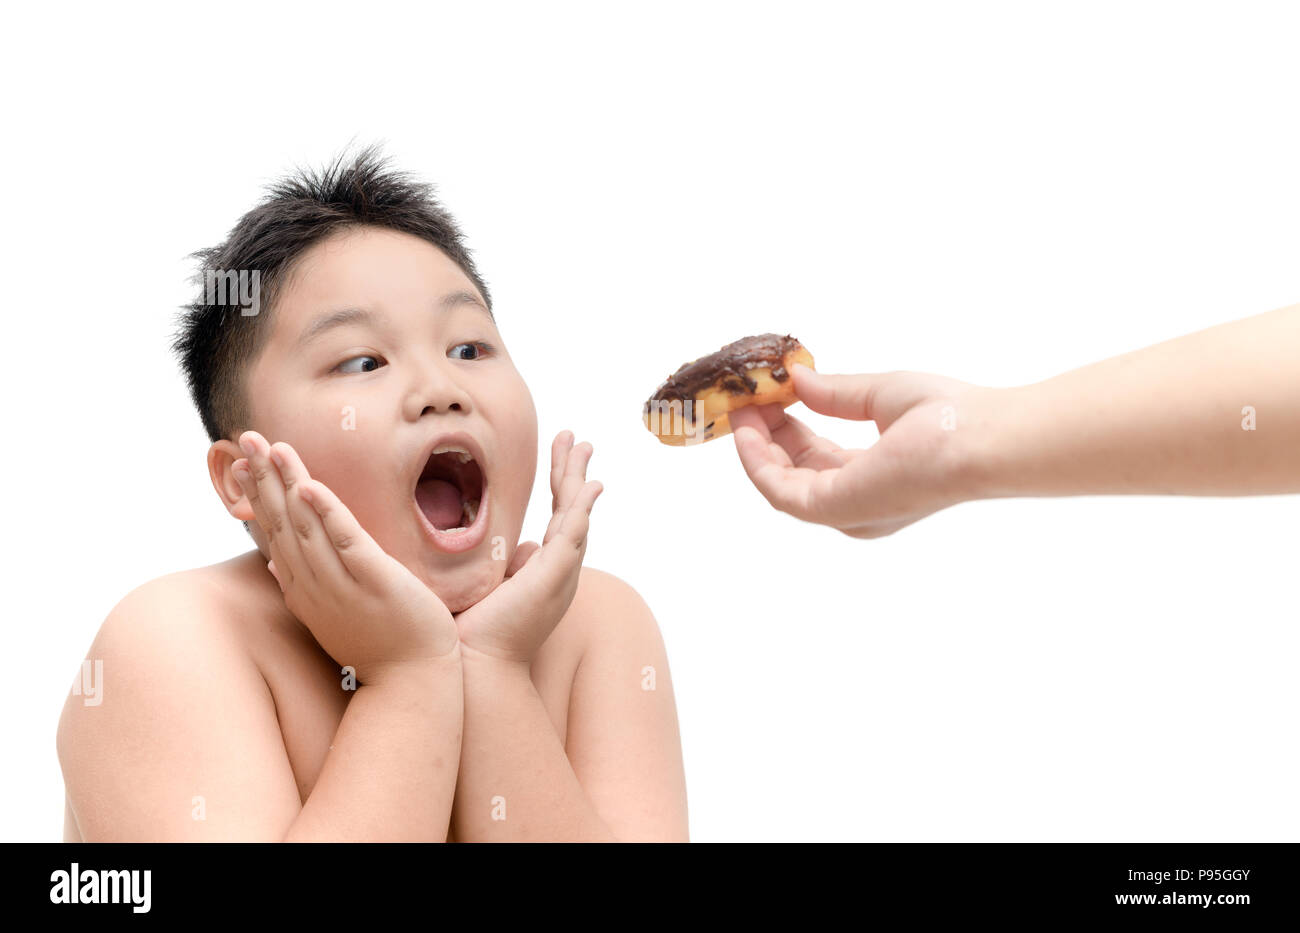 Obese fat boy is eating donut from mother hand isolated on white background, junk food and dieting concept Stock Photo